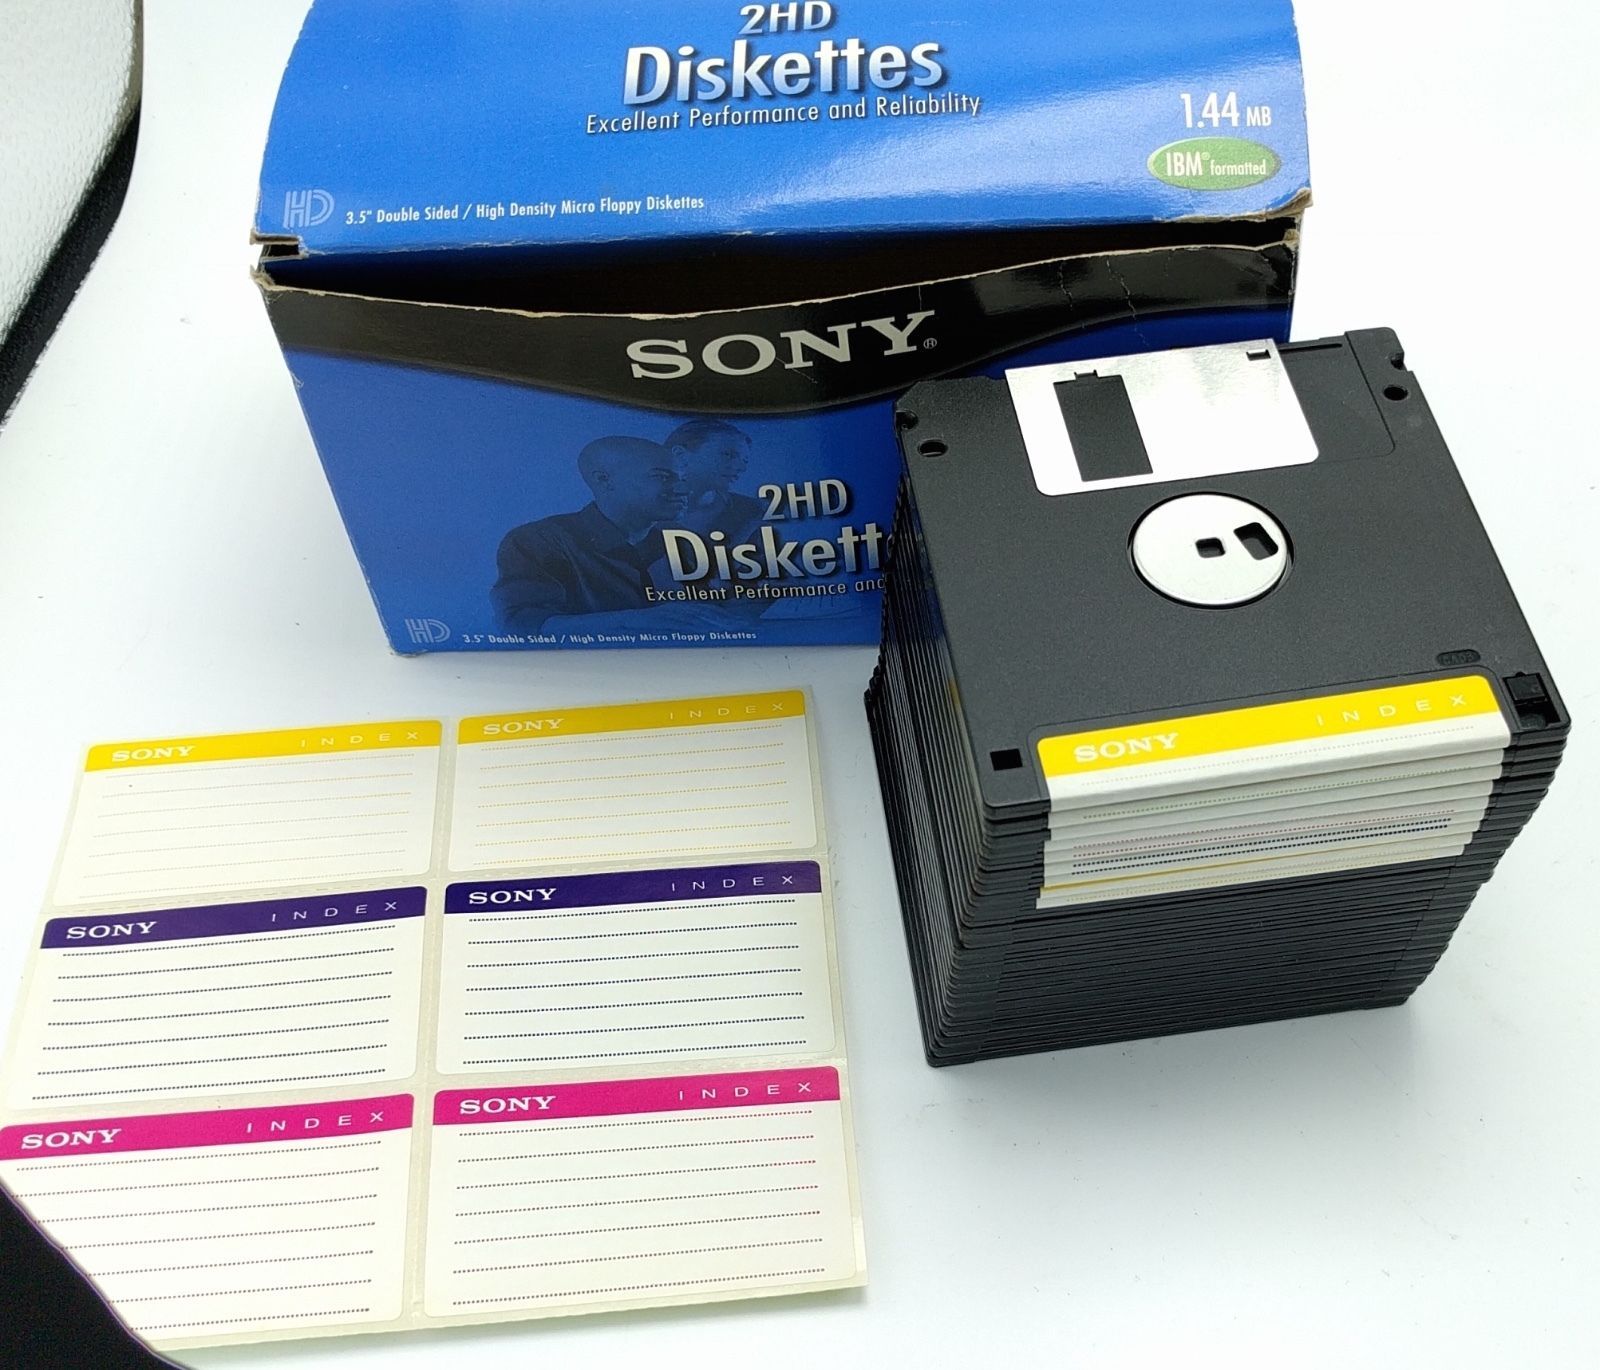 is the ibm formatted floppy disk legendary